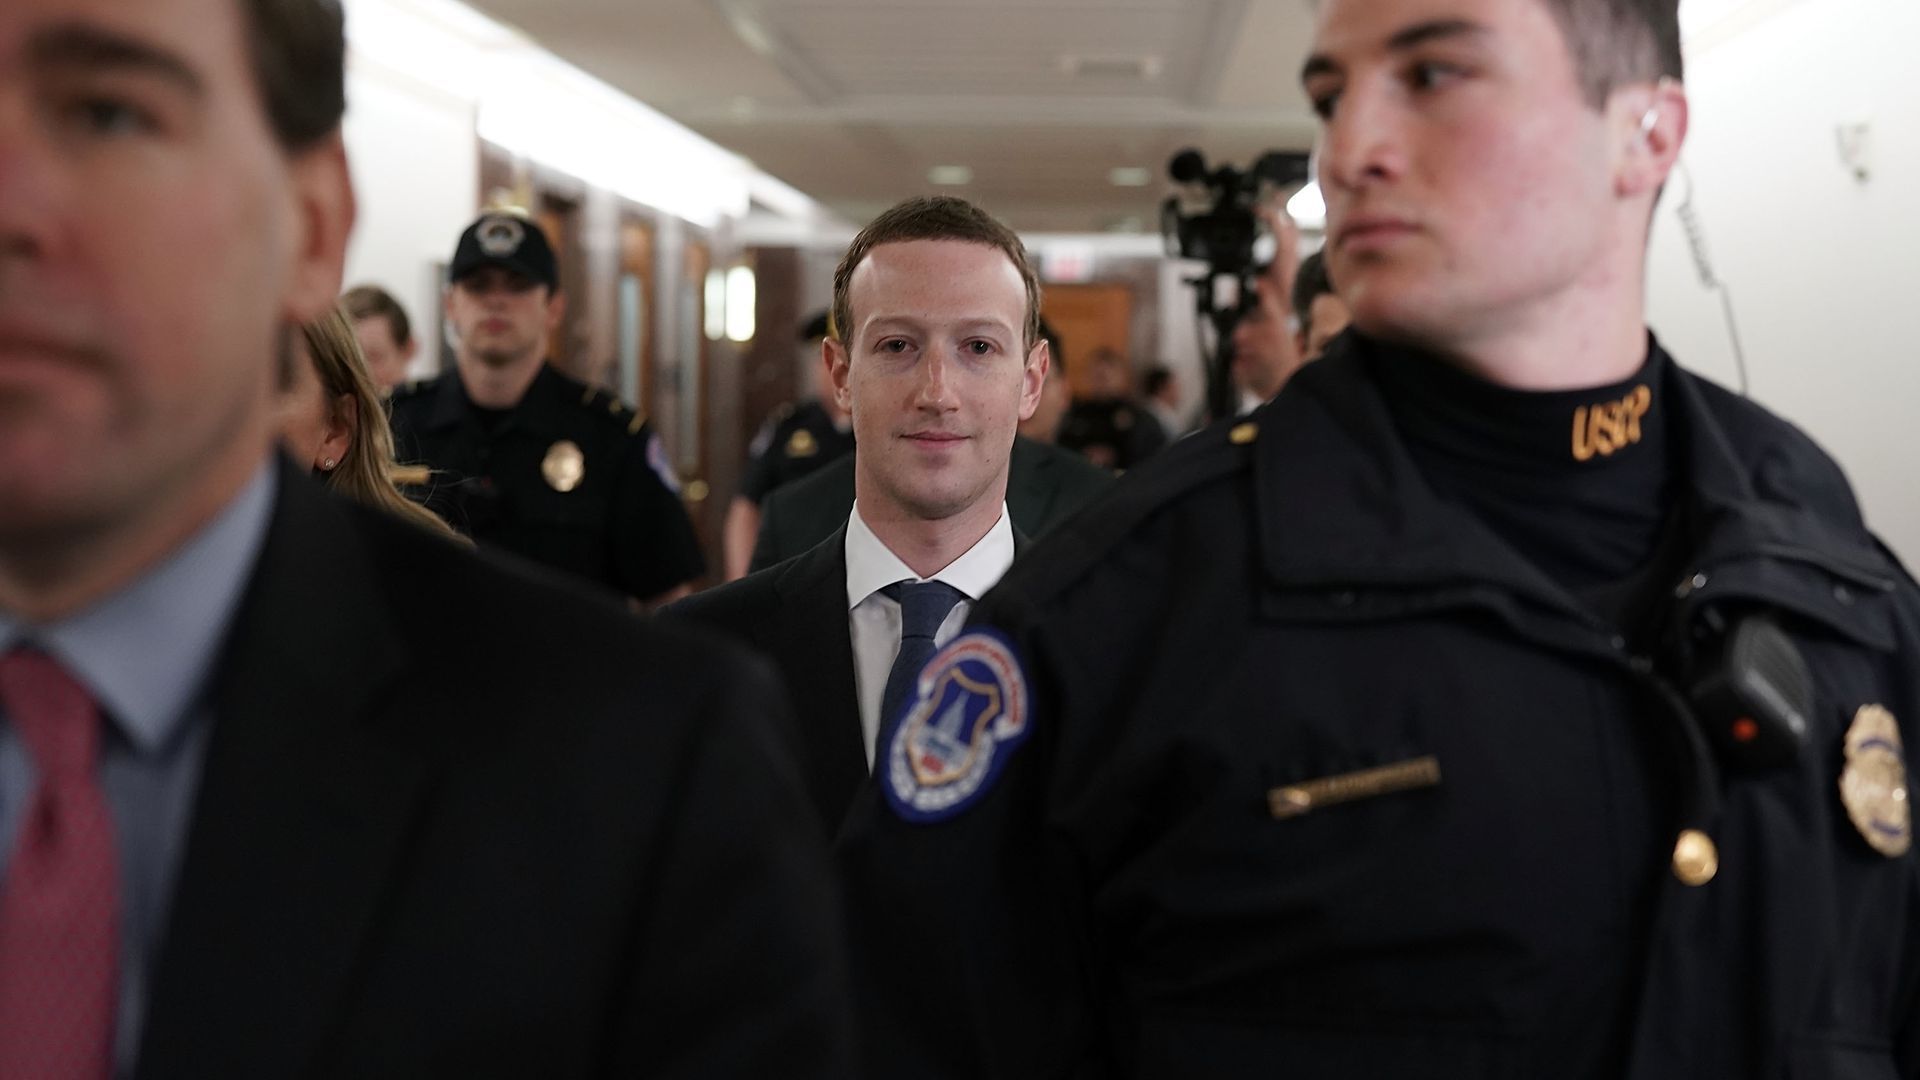 Zuckerberg behind two security guards